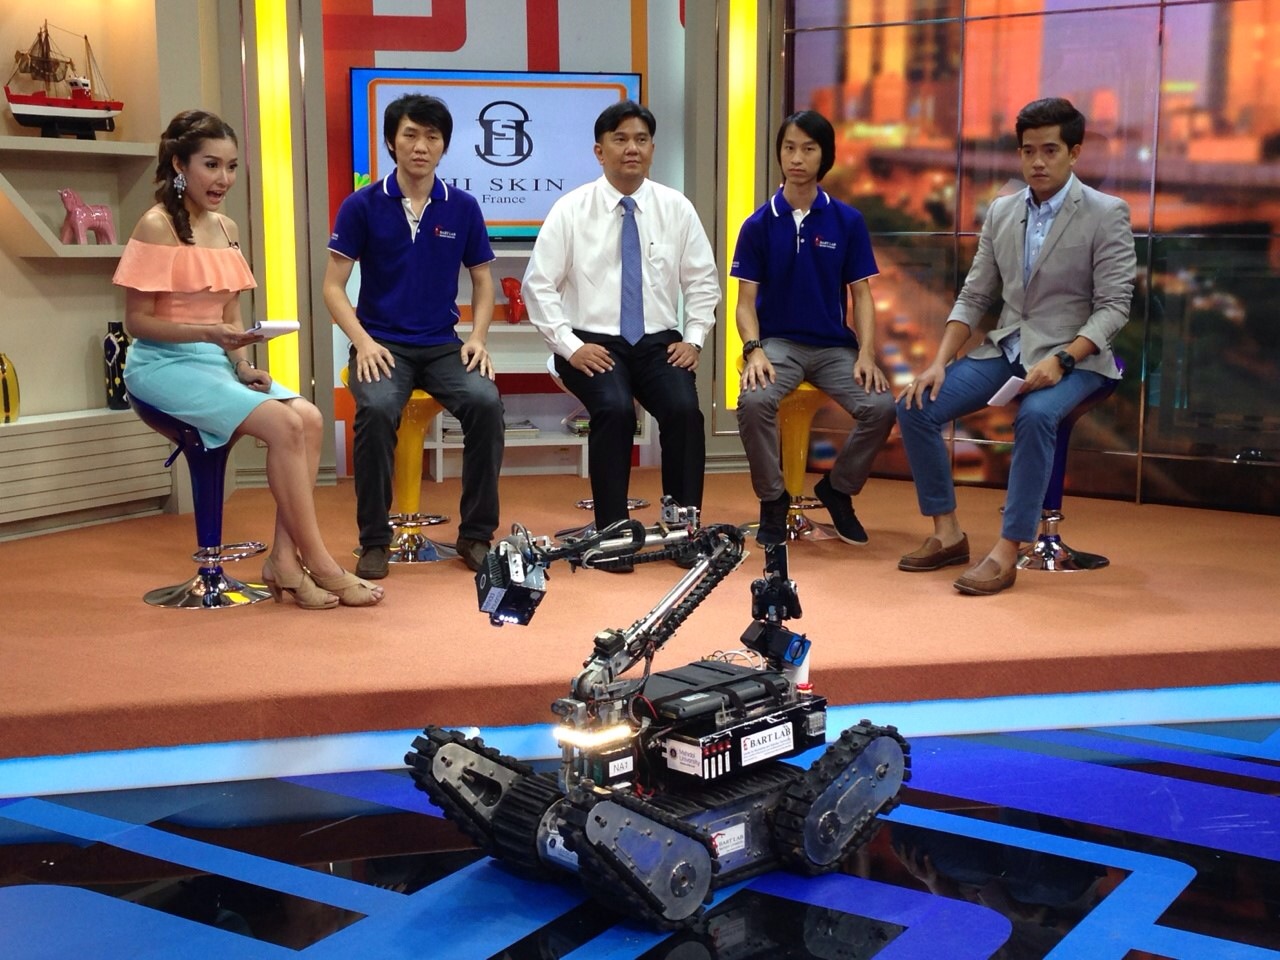 BART LAB Rescue Robotics Team Joined Several TV Programs for the Real Rescue Experience